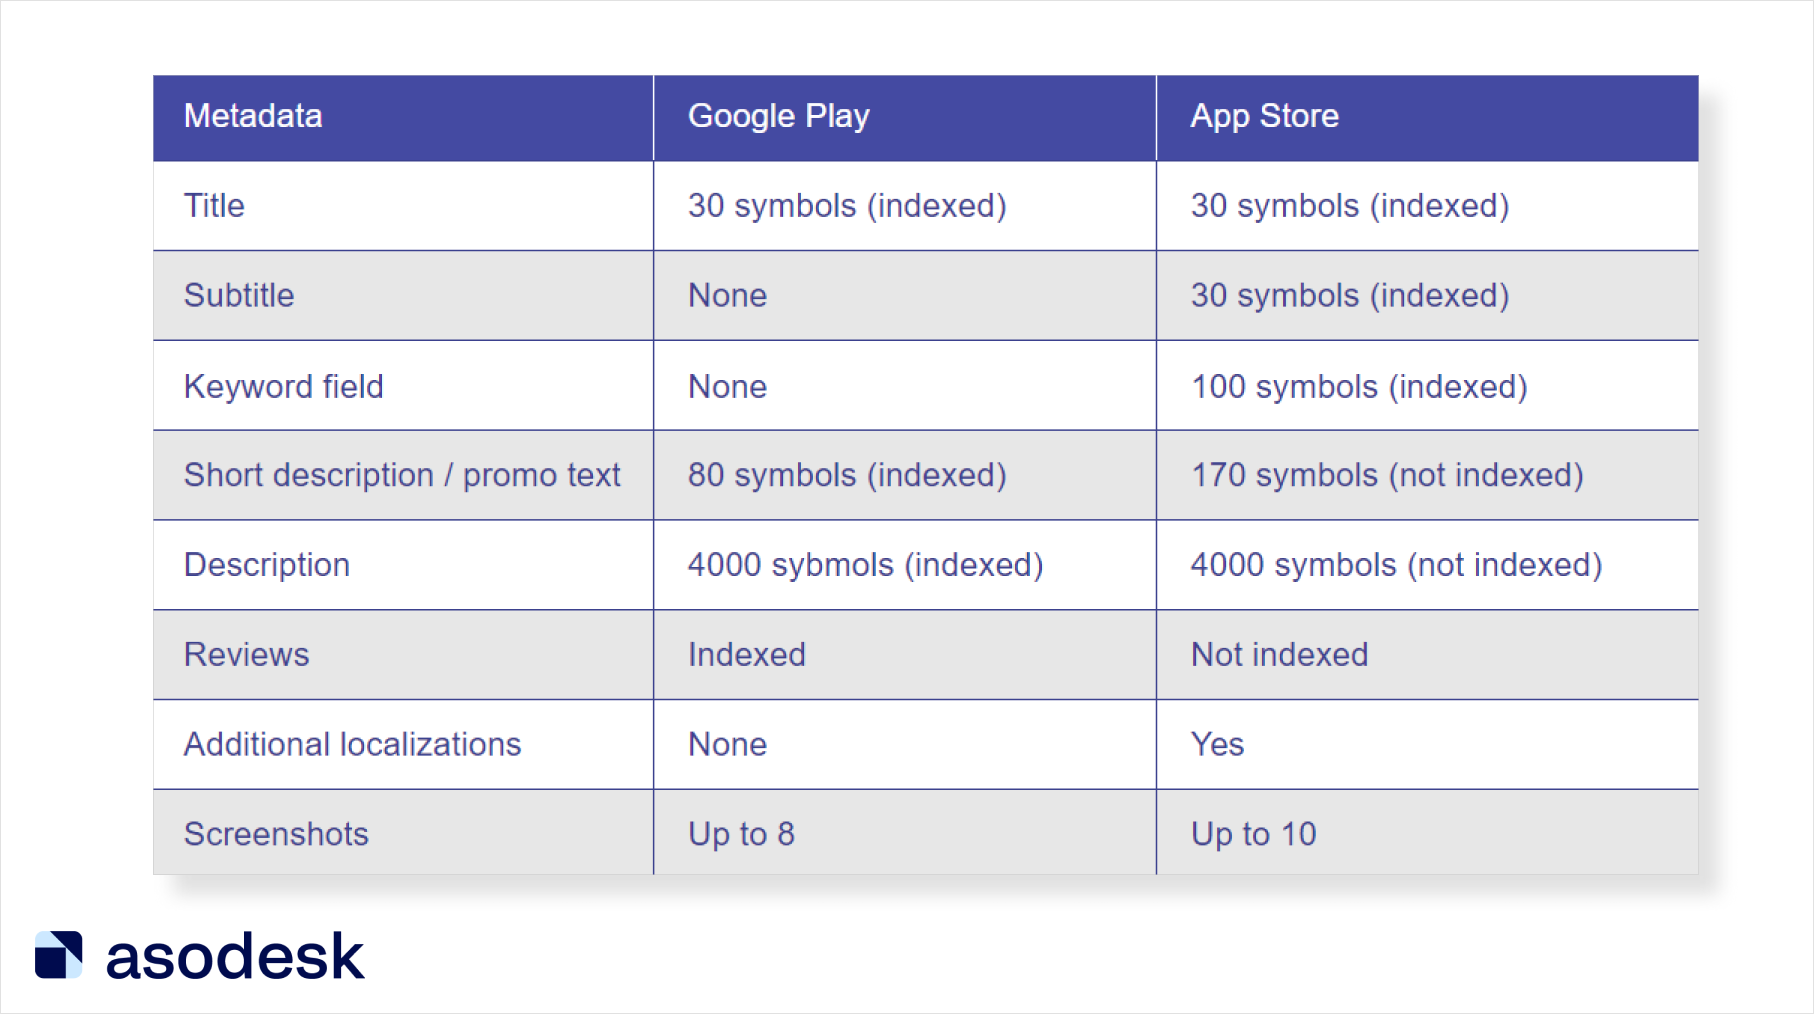 The metadata requirements for the app page in the App Store and Google Play are different